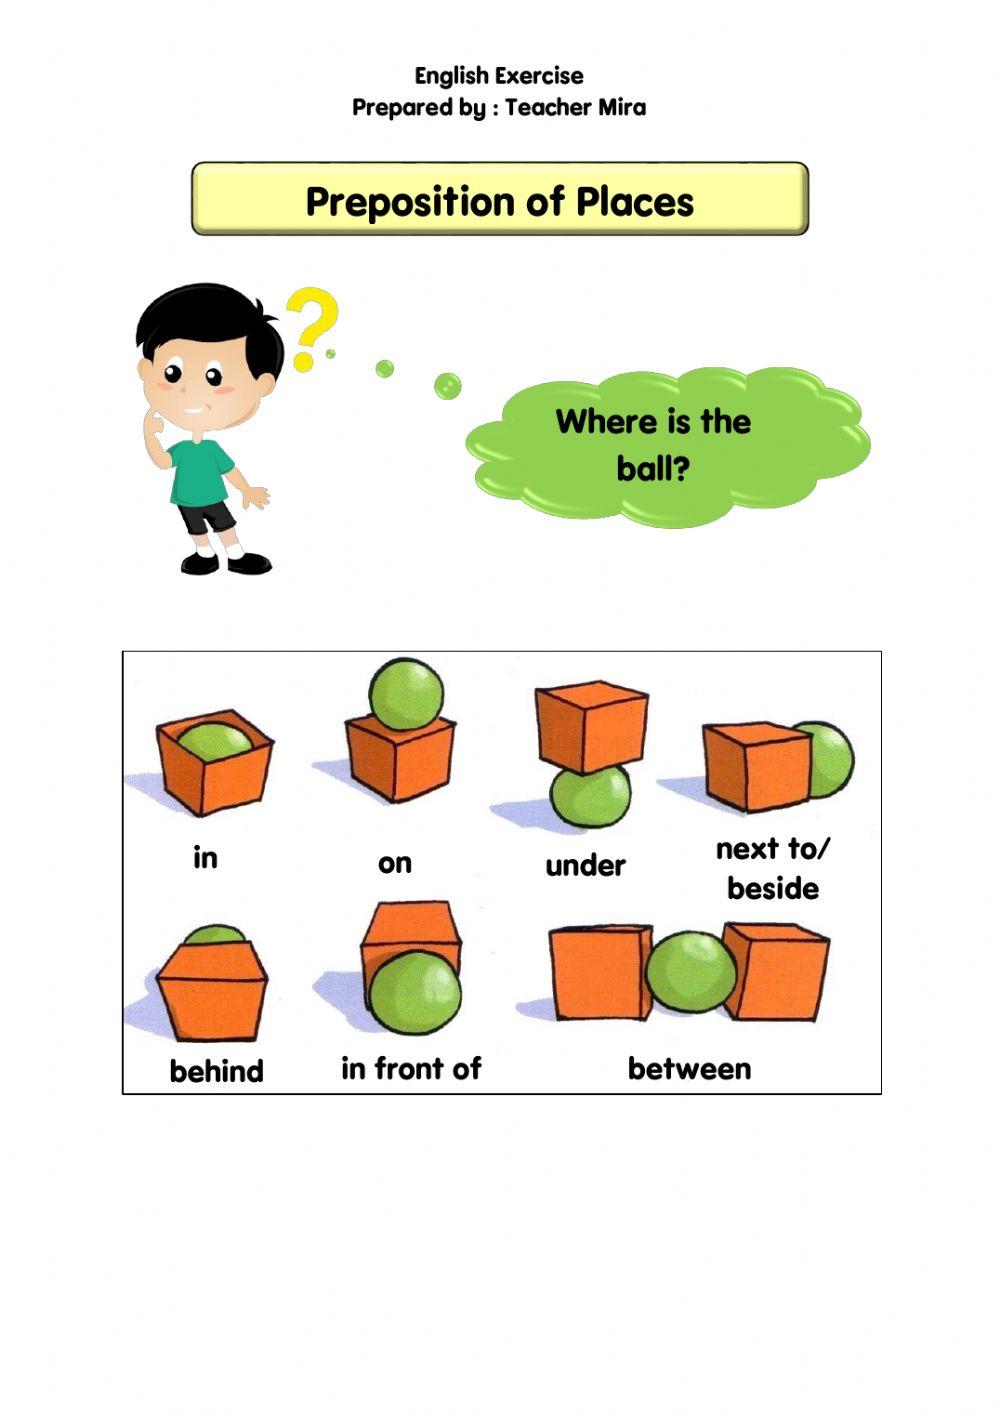 Preposition of Places